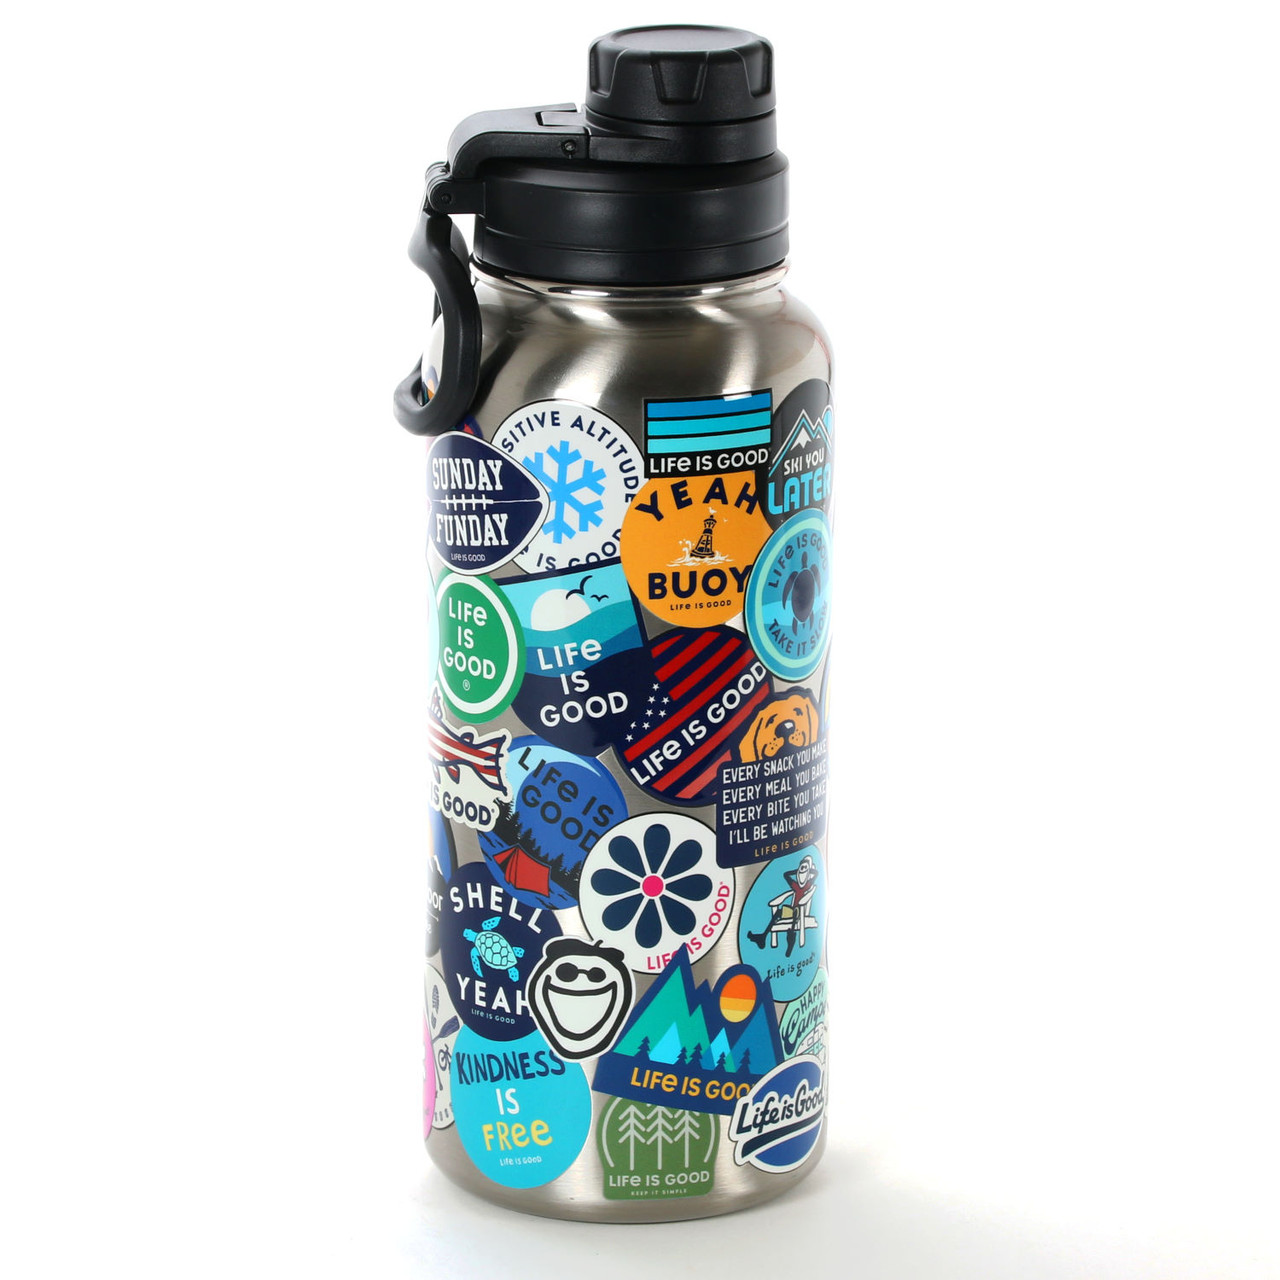 https://cdn11.bigcommerce.com/s-pqt7n8/images/stencil/1280x1280/products/11197/28142/life-is-good-stainless-water-bottle-sticker-collage2__38627.1649434919.jpg?c=2?imbypass=on